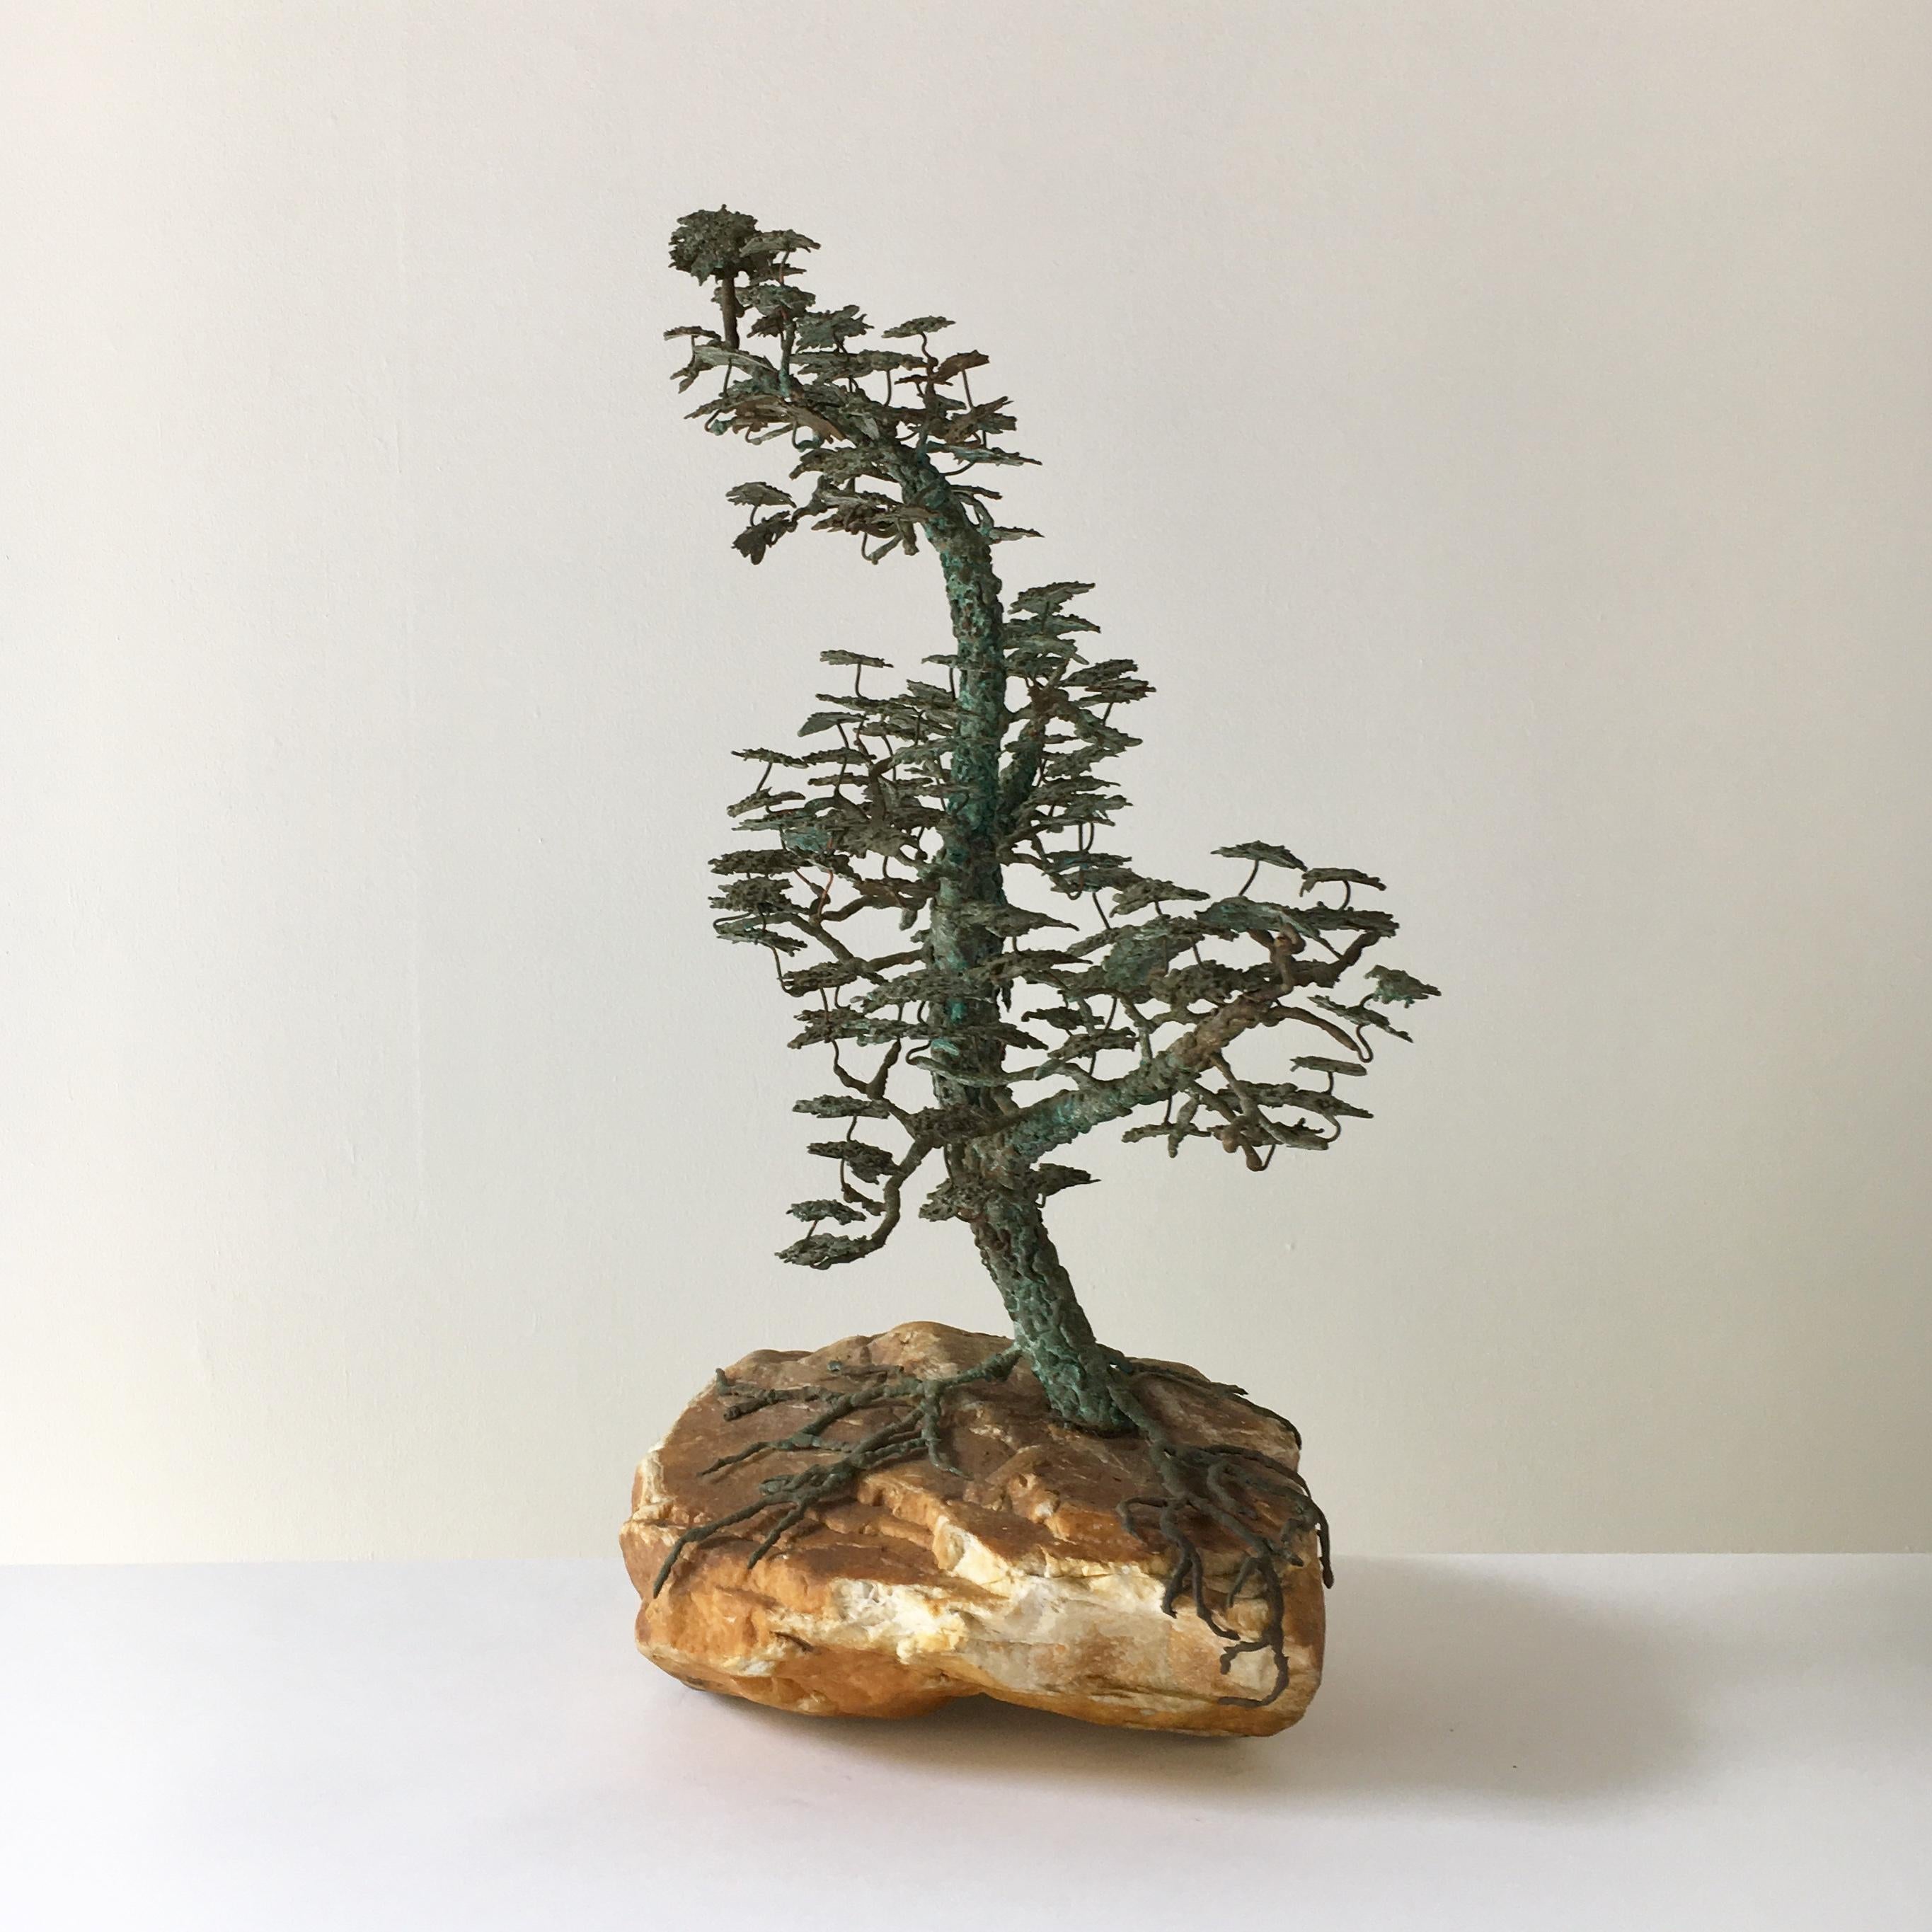 A rare table sculpture in bronze of a bonsai tree in full leaf mounted on a sand stone coloured rocky base with the abundant roots enveloping it in a naturalistic manner mid-1960s.

Bonsai started in Japan in the 6th century. Bonsai or the art of